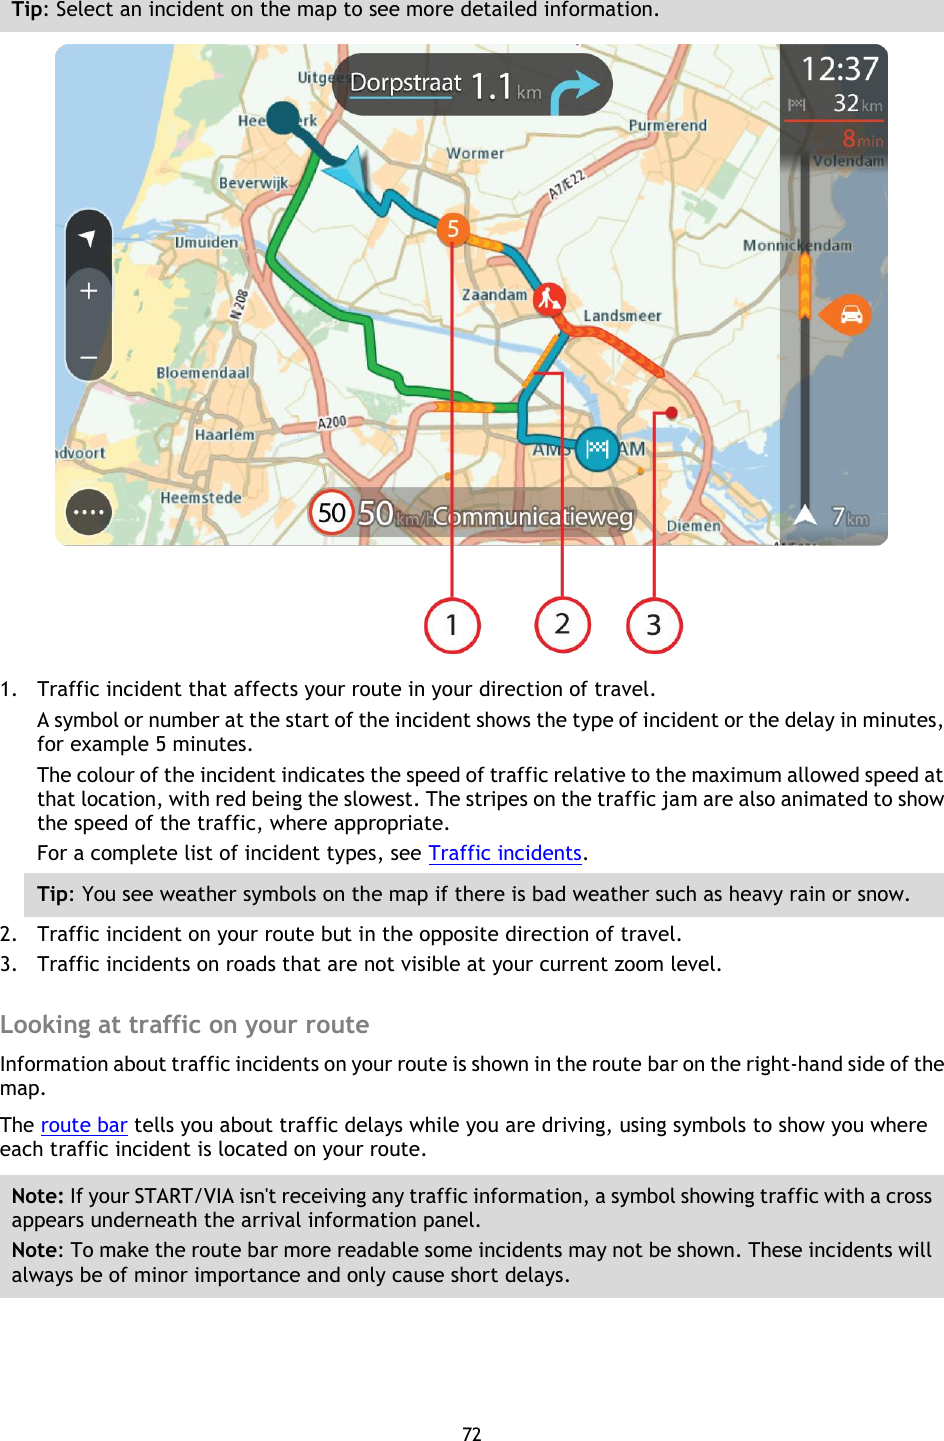 72    Tip: Select an incident on the map to see more detailed information.  1. Traffic incident that affects your route in your direction of travel. A symbol or number at the start of the incident shows the type of incident or the delay in minutes, for example 5 minutes.   The colour of the incident indicates the speed of traffic relative to the maximum allowed speed at that location, with red being the slowest. The stripes on the traffic jam are also animated to show the speed of the traffic, where appropriate.   For a complete list of incident types, see Traffic incidents. Tip: You see weather symbols on the map if there is bad weather such as heavy rain or snow.    2. Traffic incident on your route but in the opposite direction of travel. 3. Traffic incidents on roads that are not visible at your current zoom level.  Looking at traffic on your route Information about traffic incidents on your route is shown in the route bar on the right-hand side of the map. The route bar tells you about traffic delays while you are driving, using symbols to show you where each traffic incident is located on your route. Note: If your START/VIA isn&apos;t receiving any traffic information, a symbol showing traffic with a cross appears underneath the arrival information panel. Note: To make the route bar more readable some incidents may not be shown. These incidents will always be of minor importance and only cause short delays. 